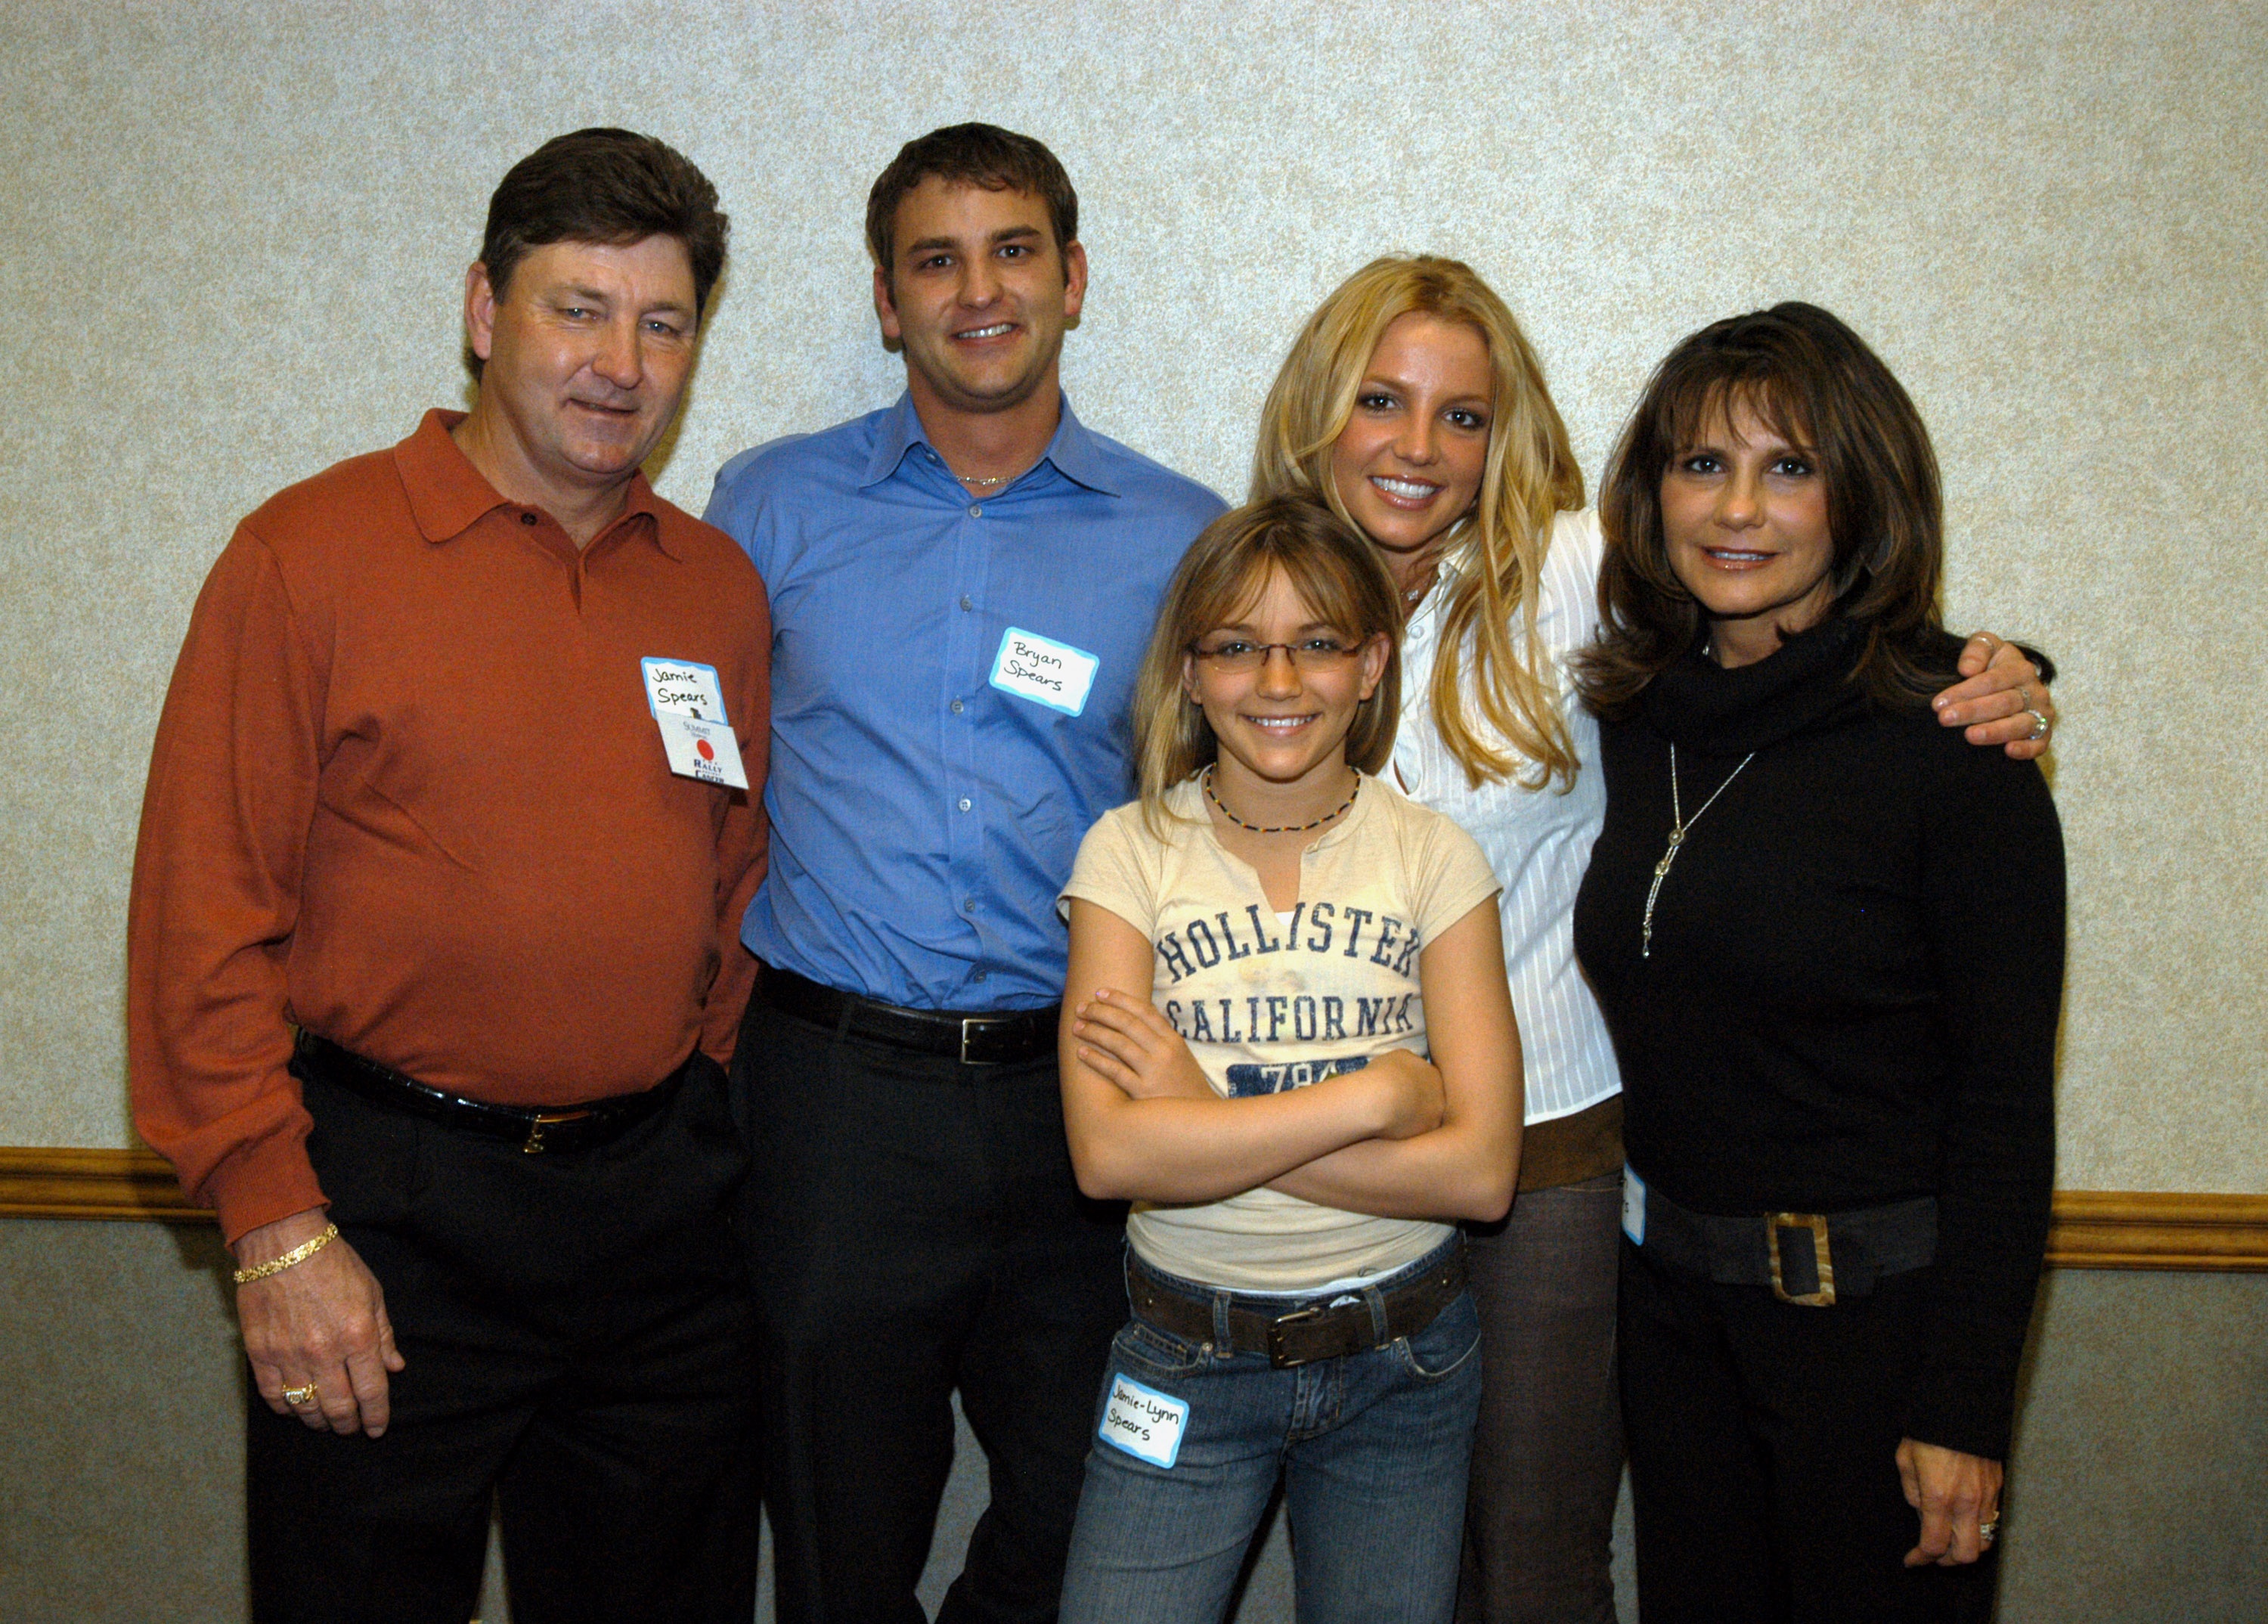 Britney Spears with her parents, Jamie Spears and Lynne Spears, and two siblings, Bryan Spears and Jamie-Lynn Spears